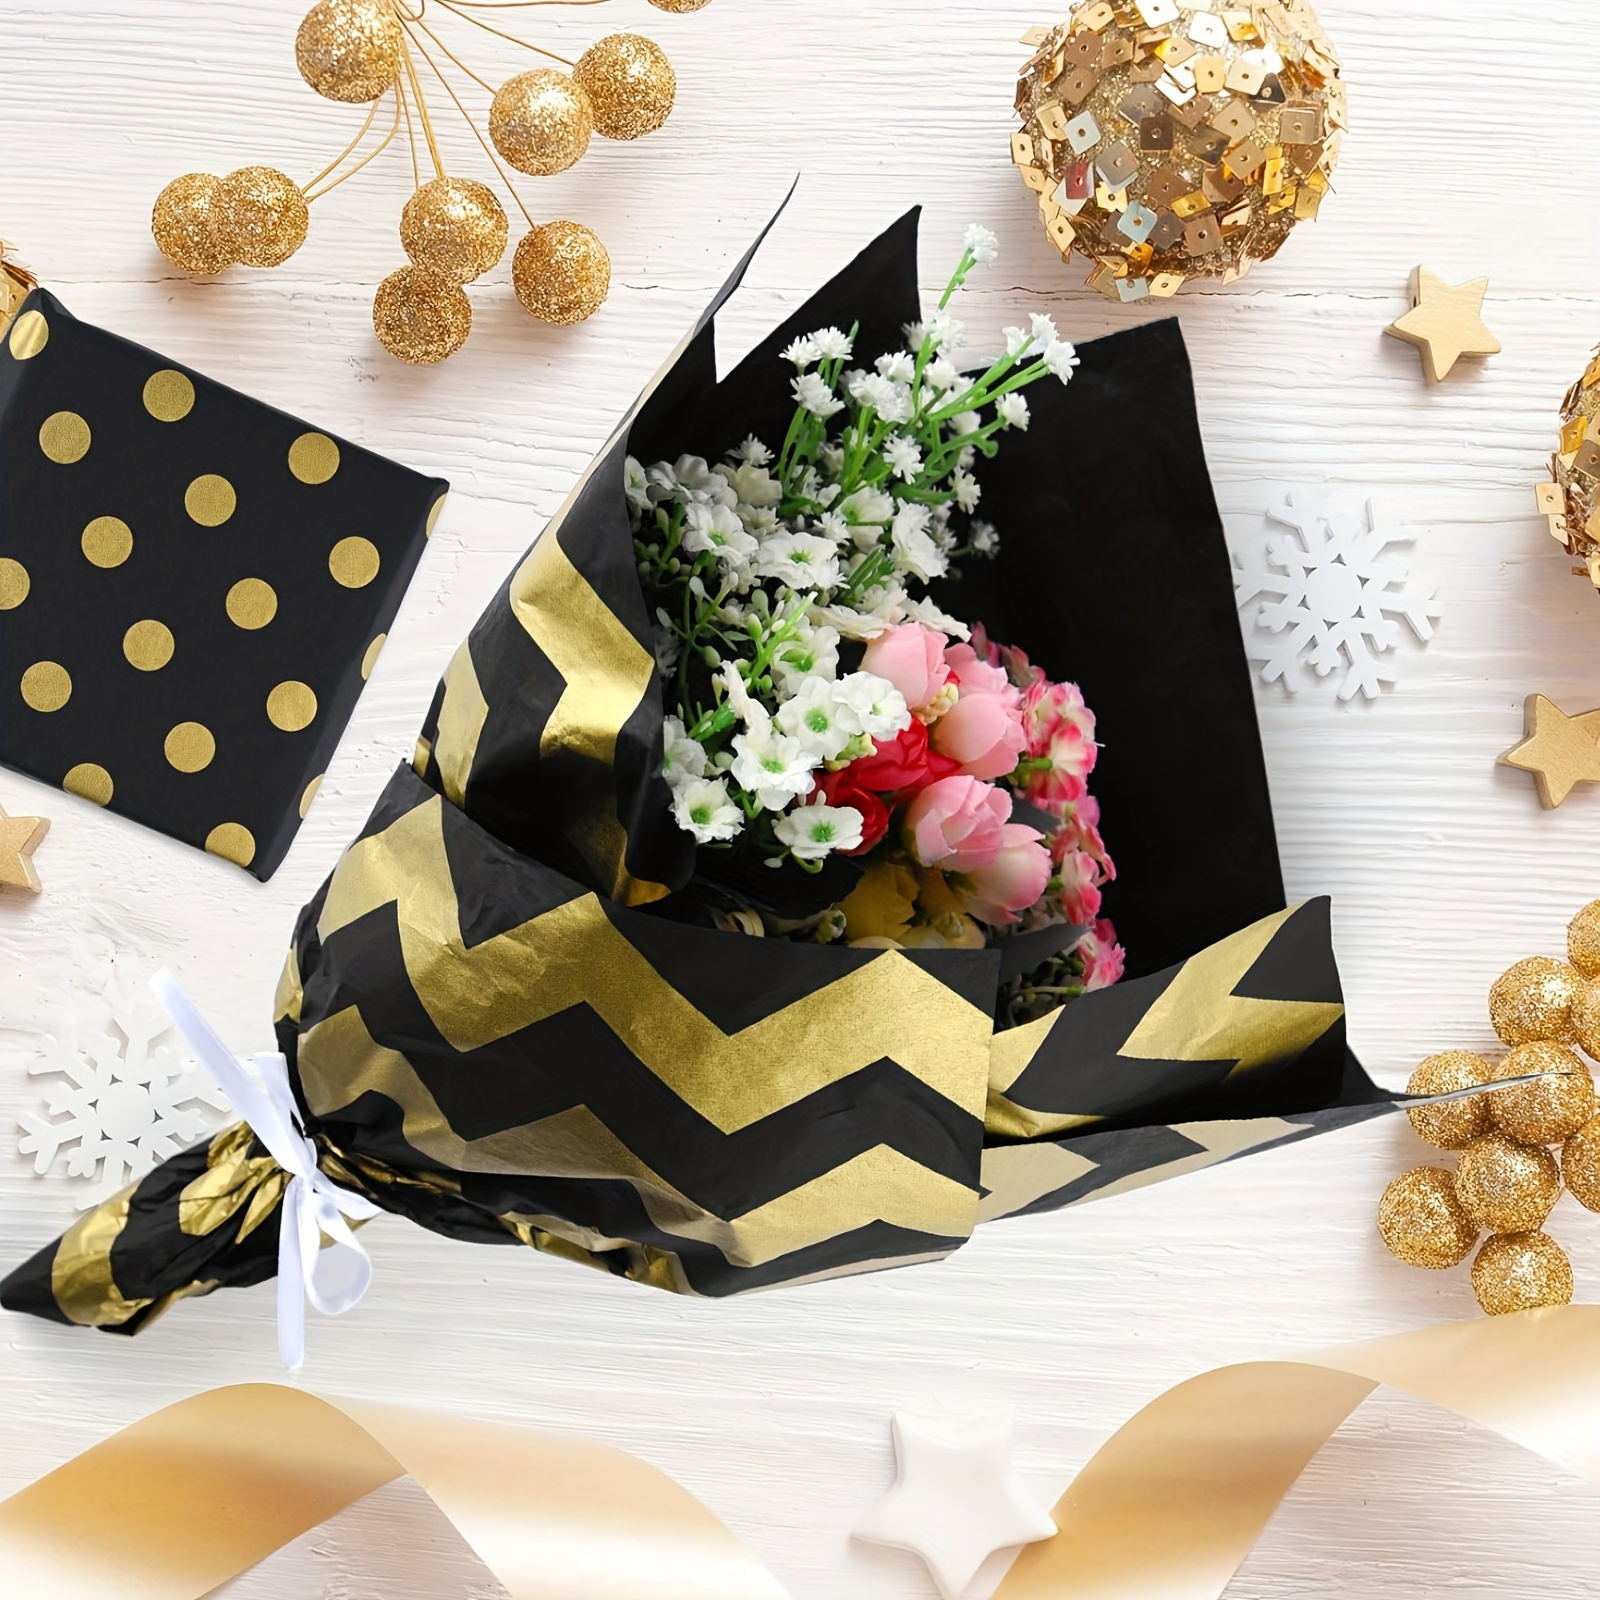 30 Sheets Gift Wrapping Paper, Premium Golden And Black Gift